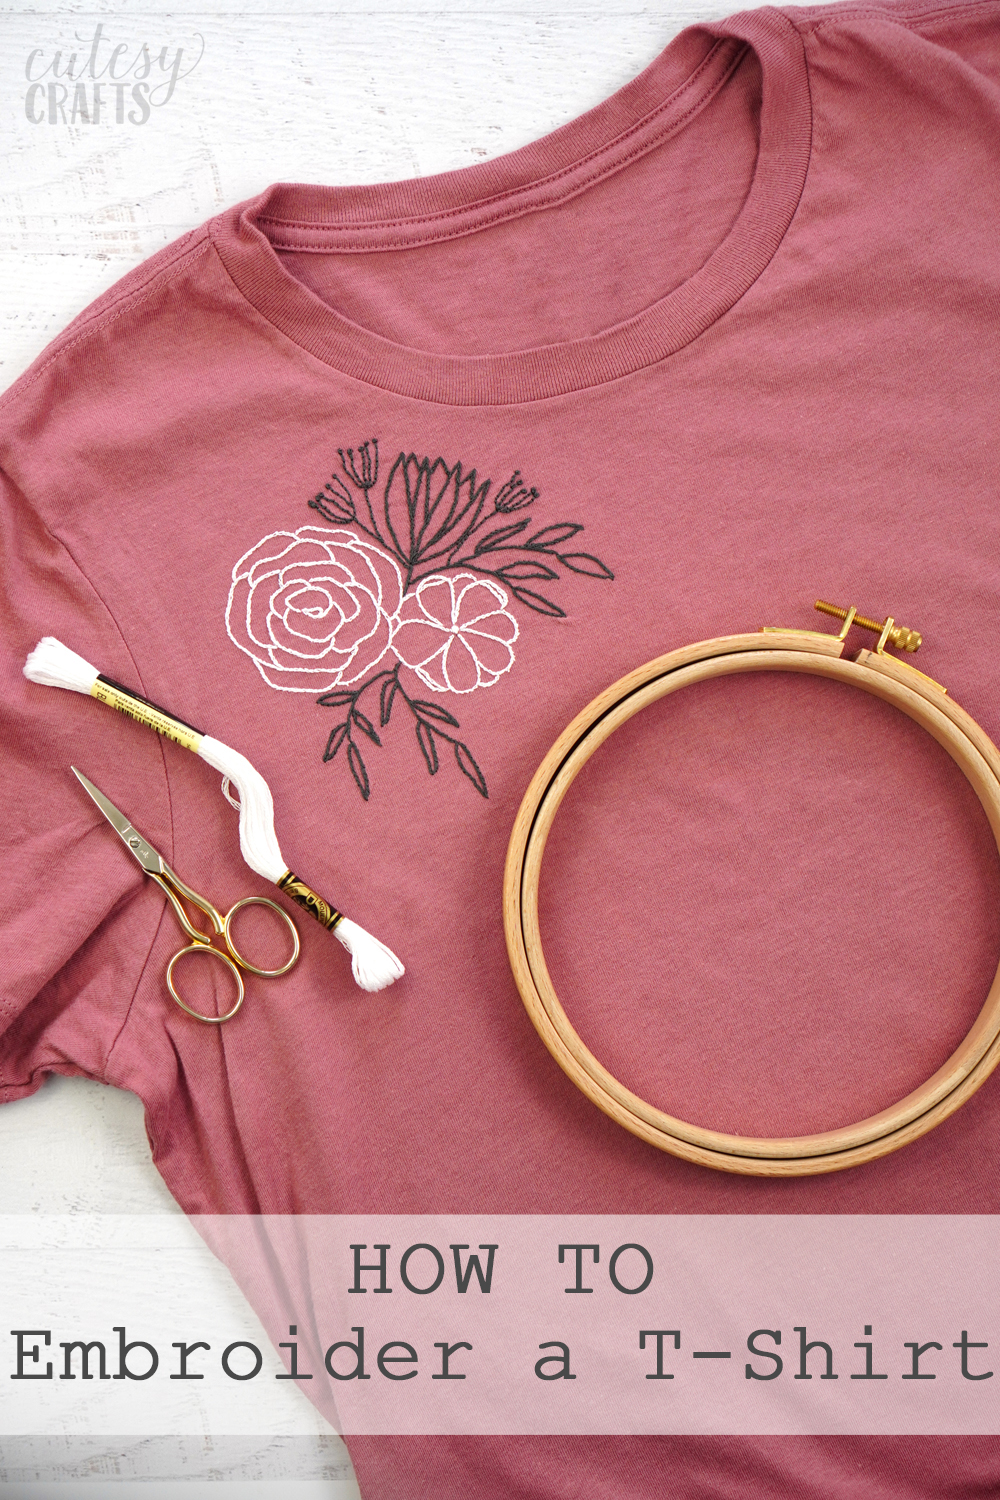 How to Embroider a Shirt by Hand in 11 Easy Steps